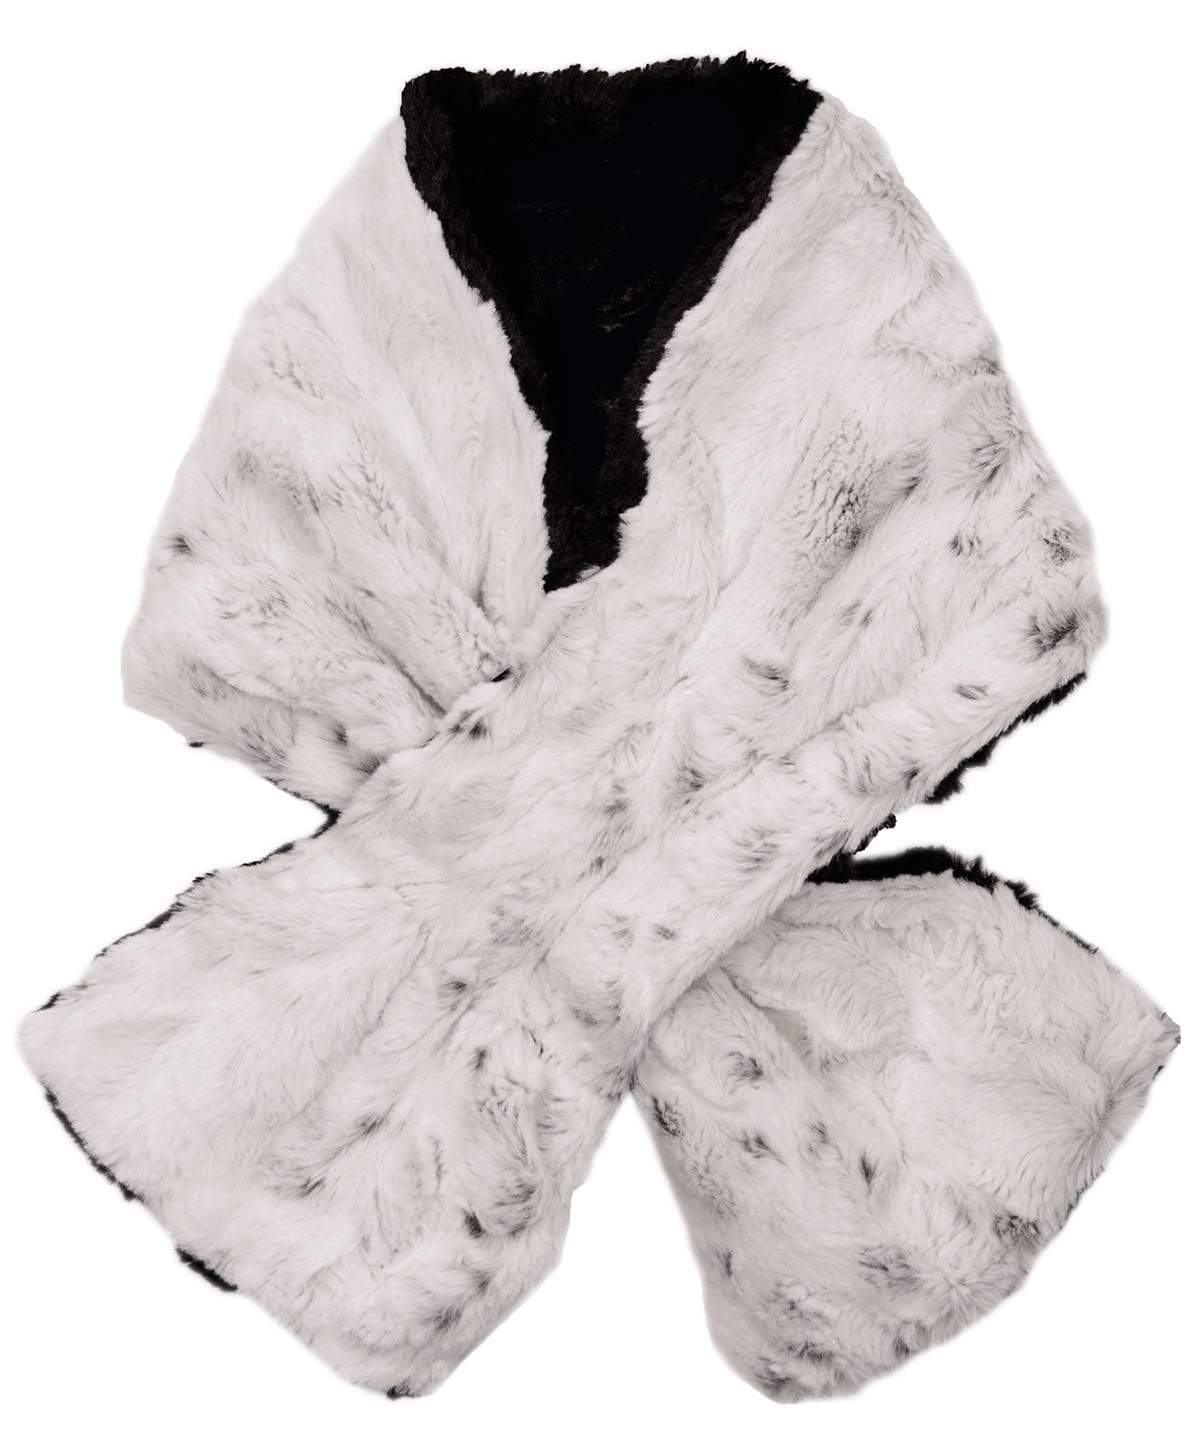 Product shot of Women’s reversible Pull Through Scarf | Winter Frost a white faux fur with light hints of black with Cuddly Faux Fur in Black| Handmade in Seattle WA | Pandemonium Millinery